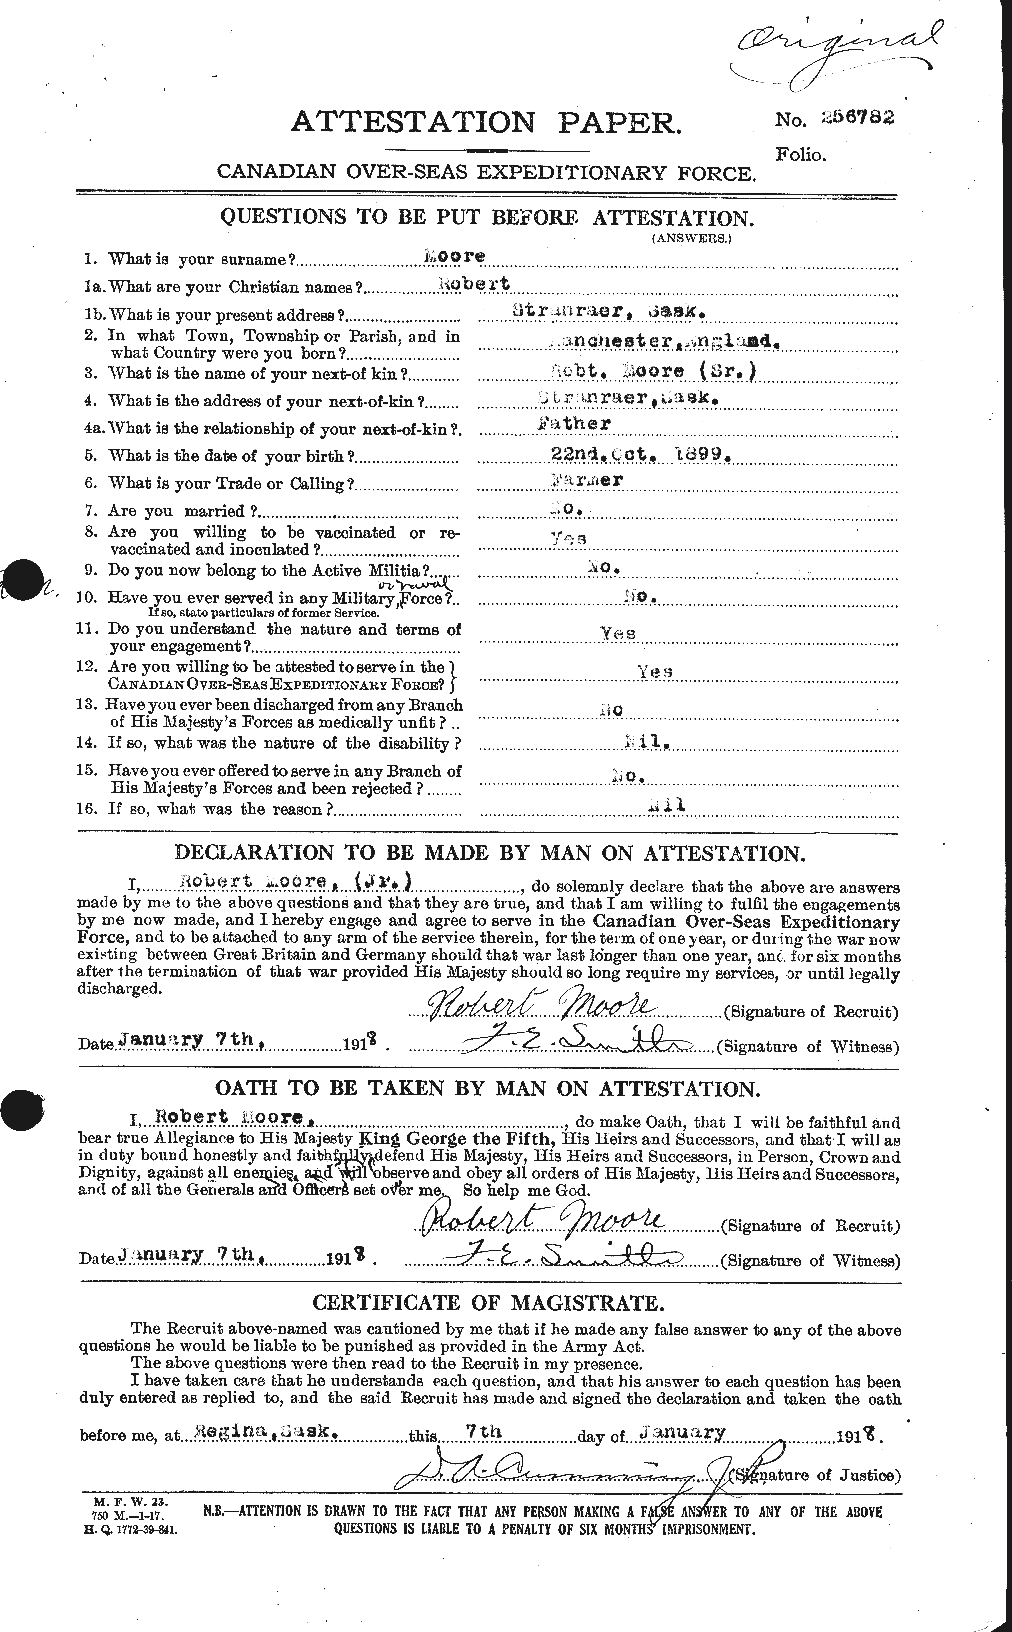 Personnel Records of the First World War - CEF 503556a